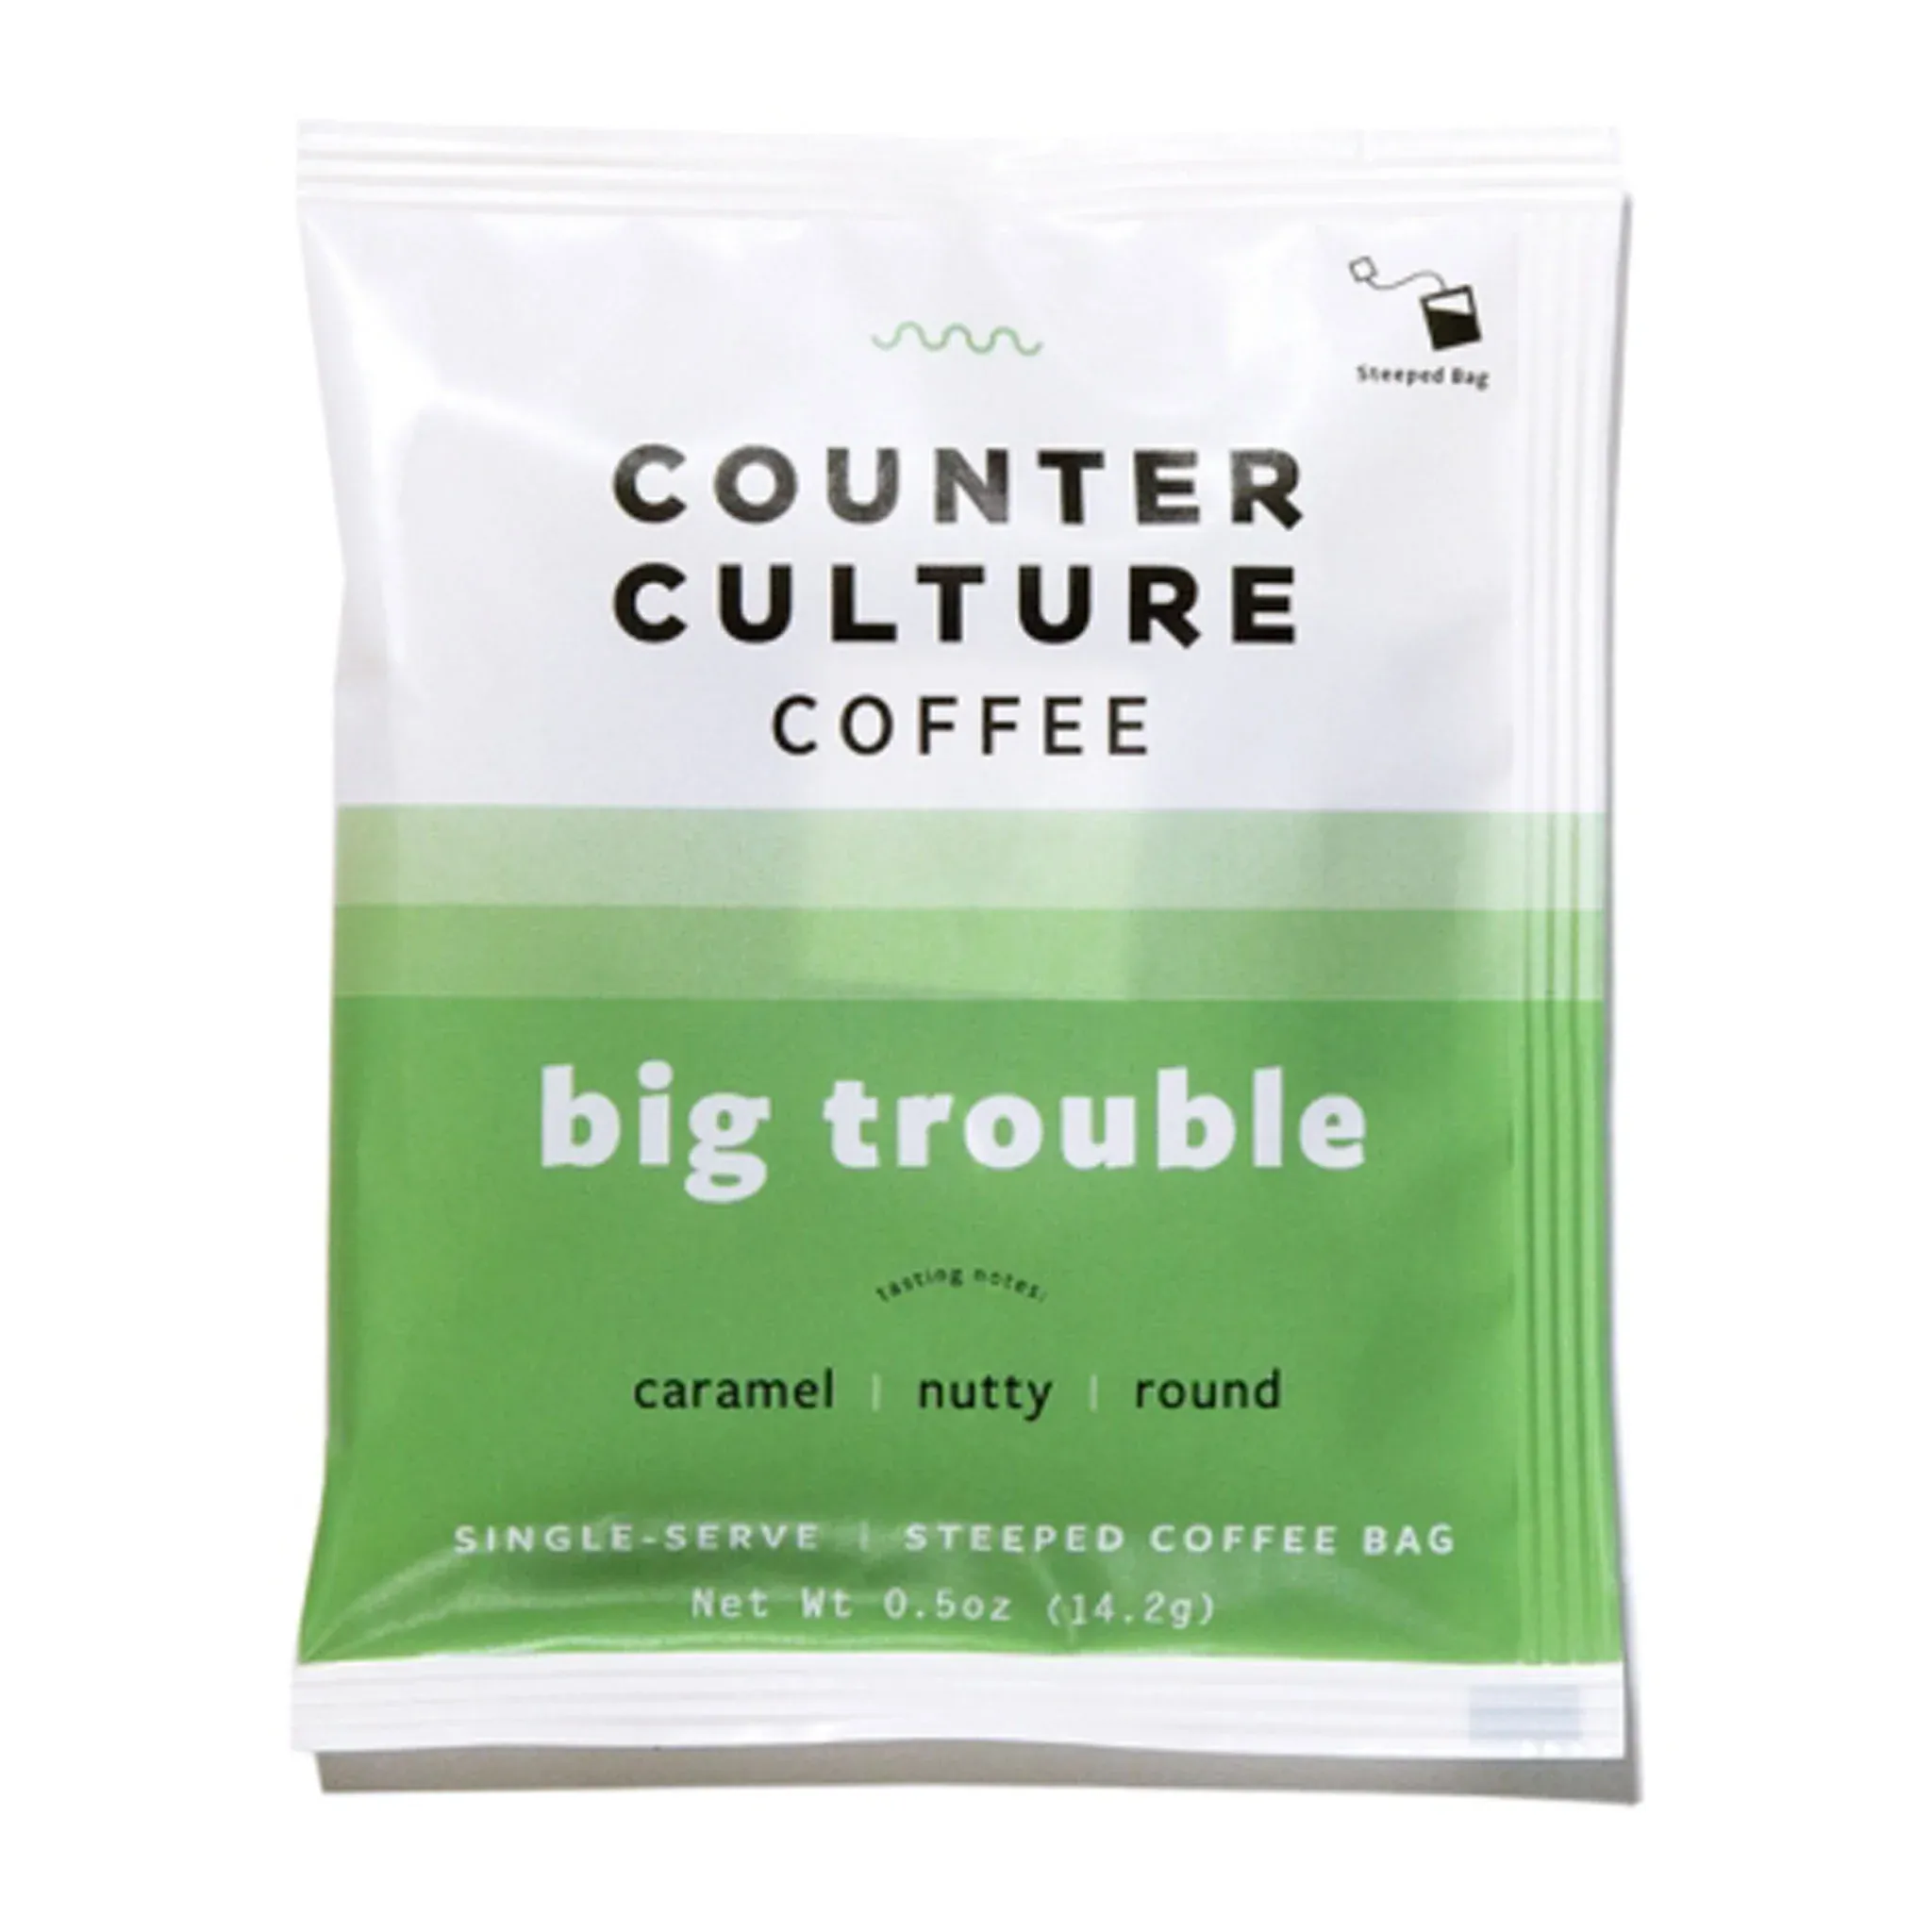 Counter Culture Coffee, Whole Bean, Big Trouble - 12 oz